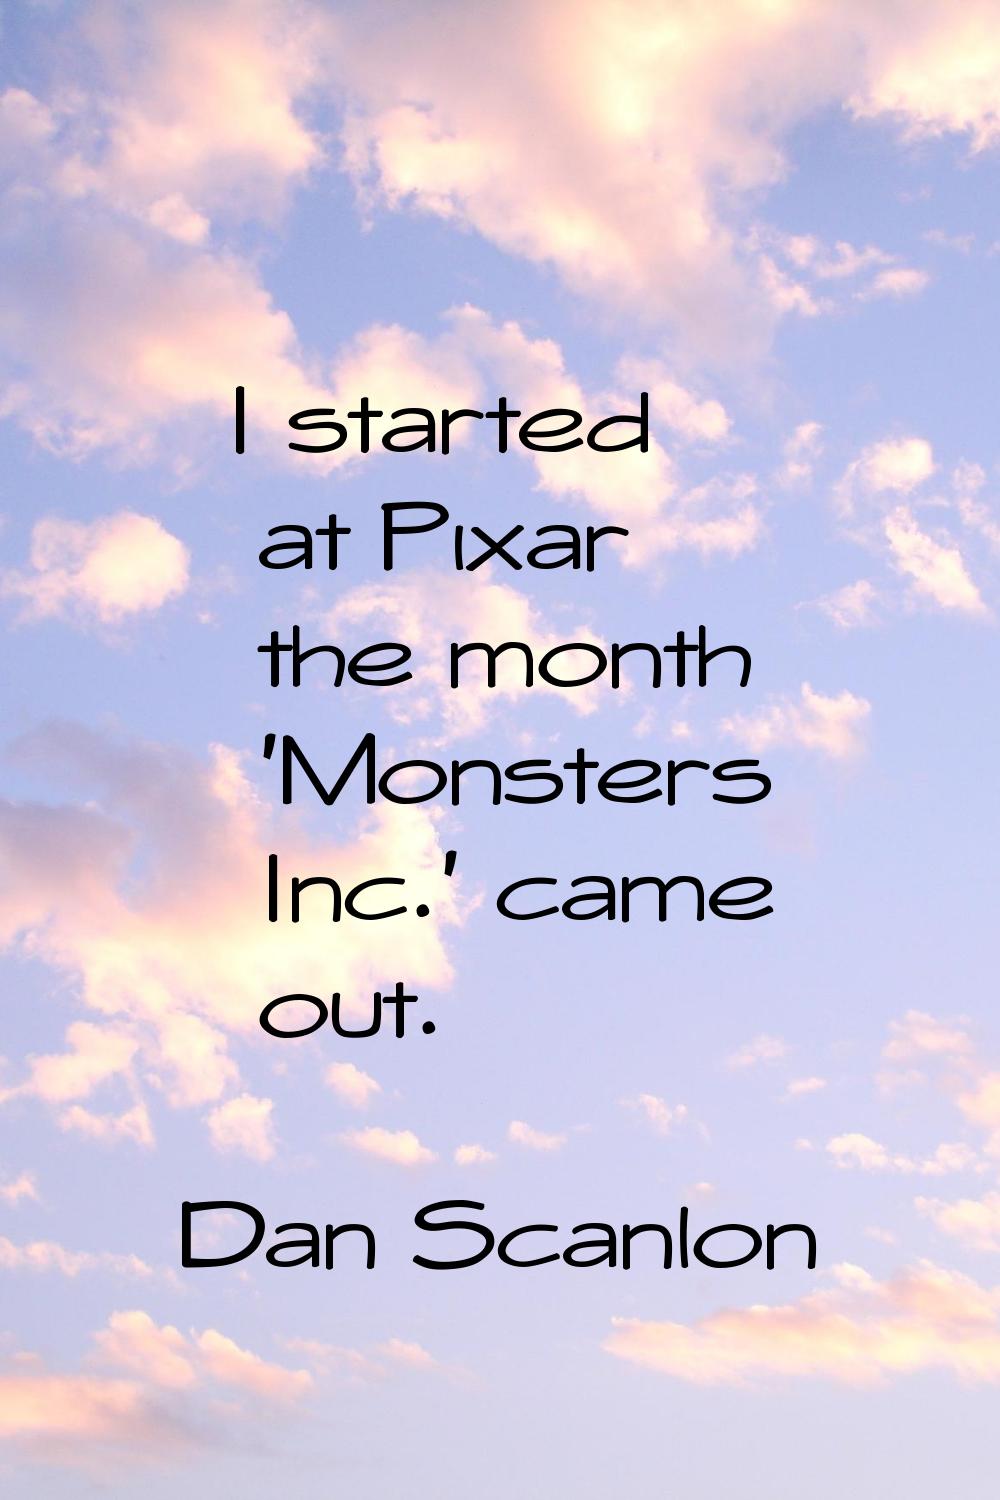 I started at Pixar the month 'Monsters Inc.' came out.